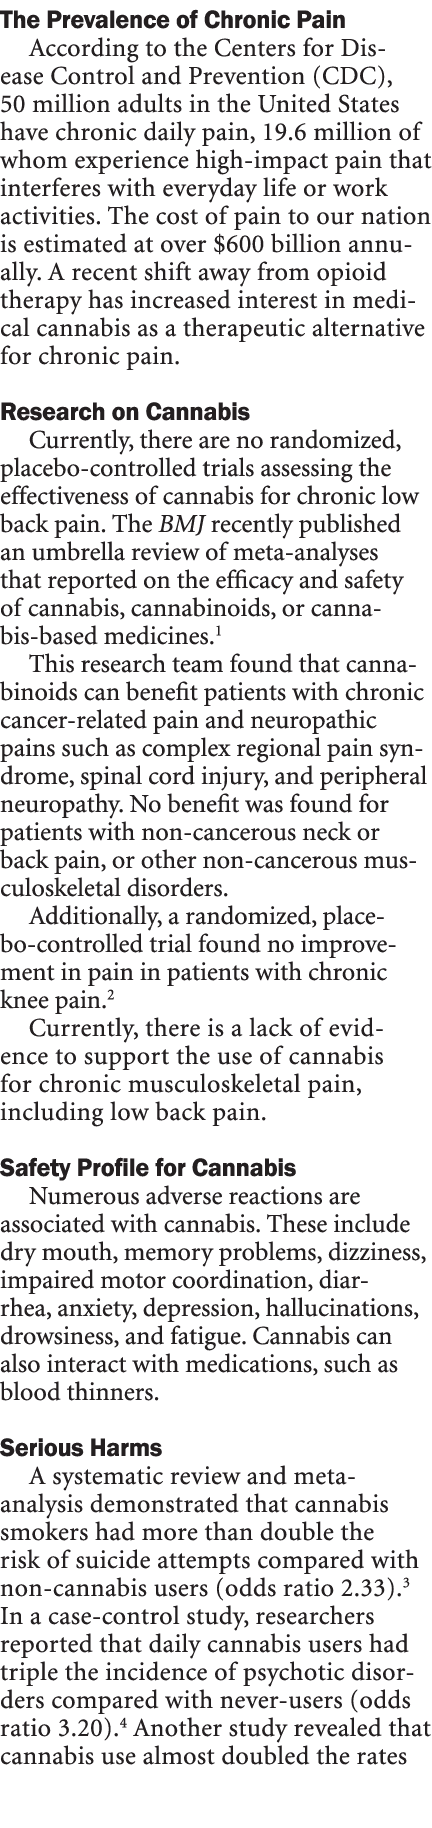 The Prevalence of Chronic Pain According to the Centers for Disease Control and Prevention (CDC), 50 million adults i...